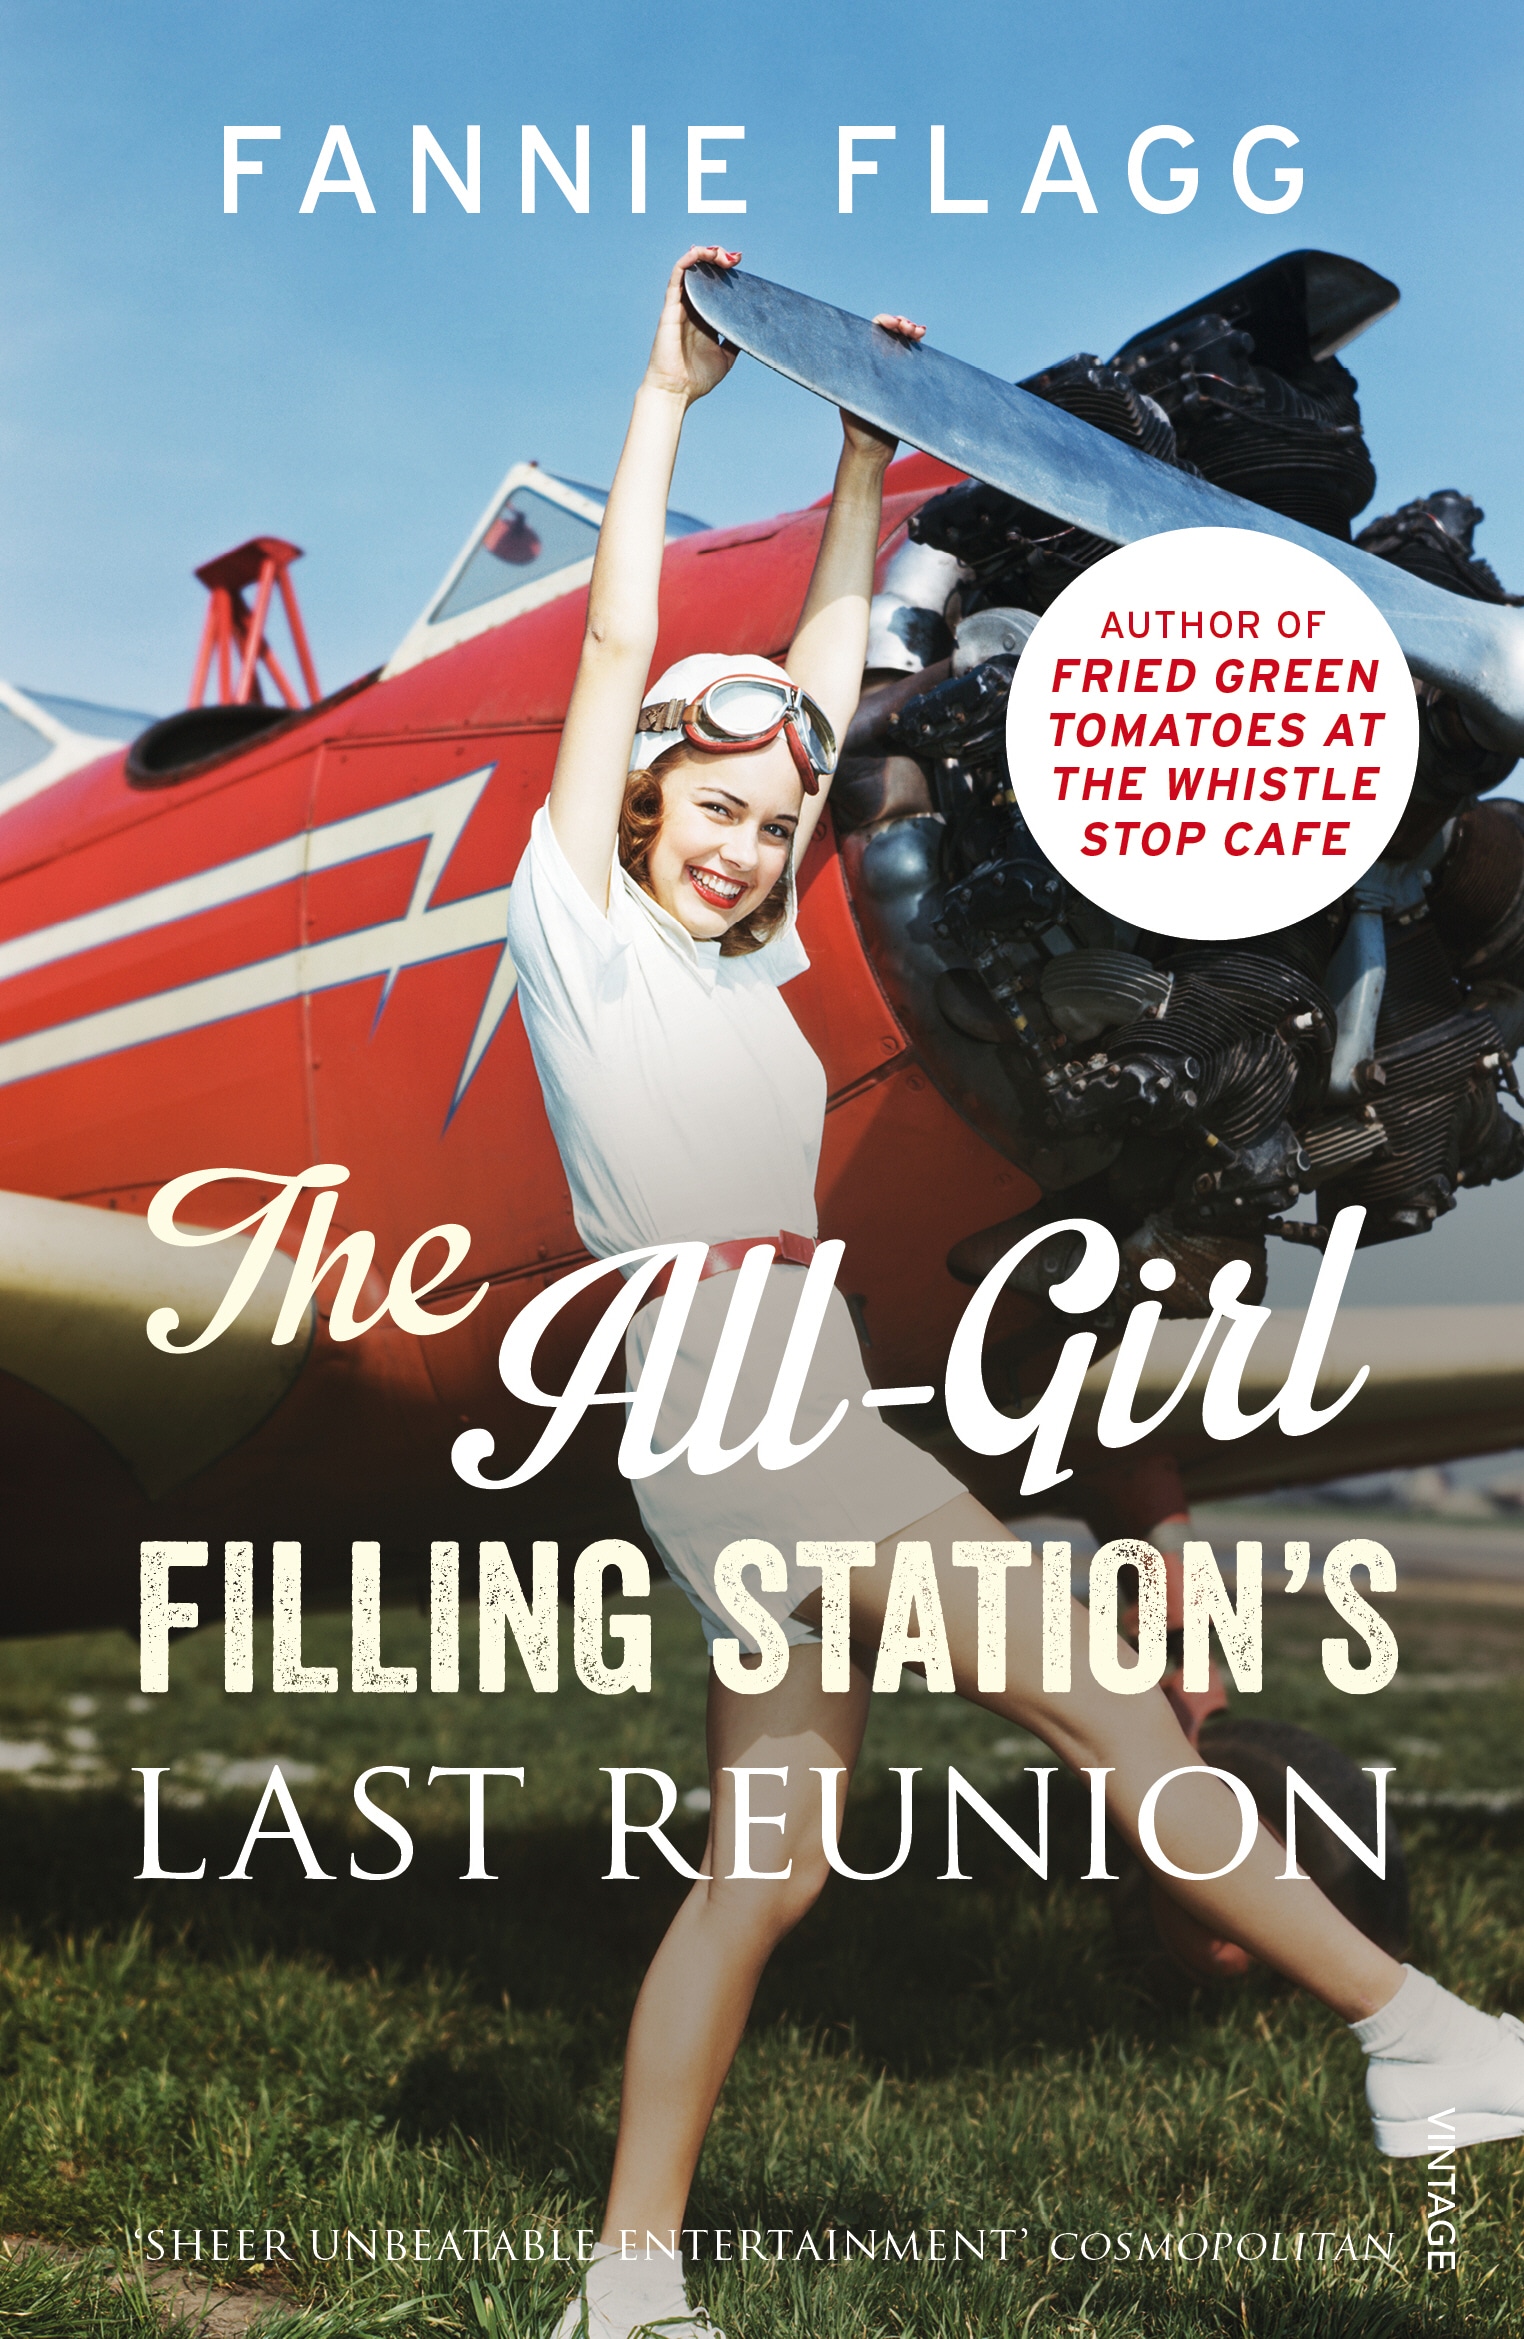 Book “The All-Girl Filling Station's Last Reunion” by Fannie Flagg — March 12, 2015